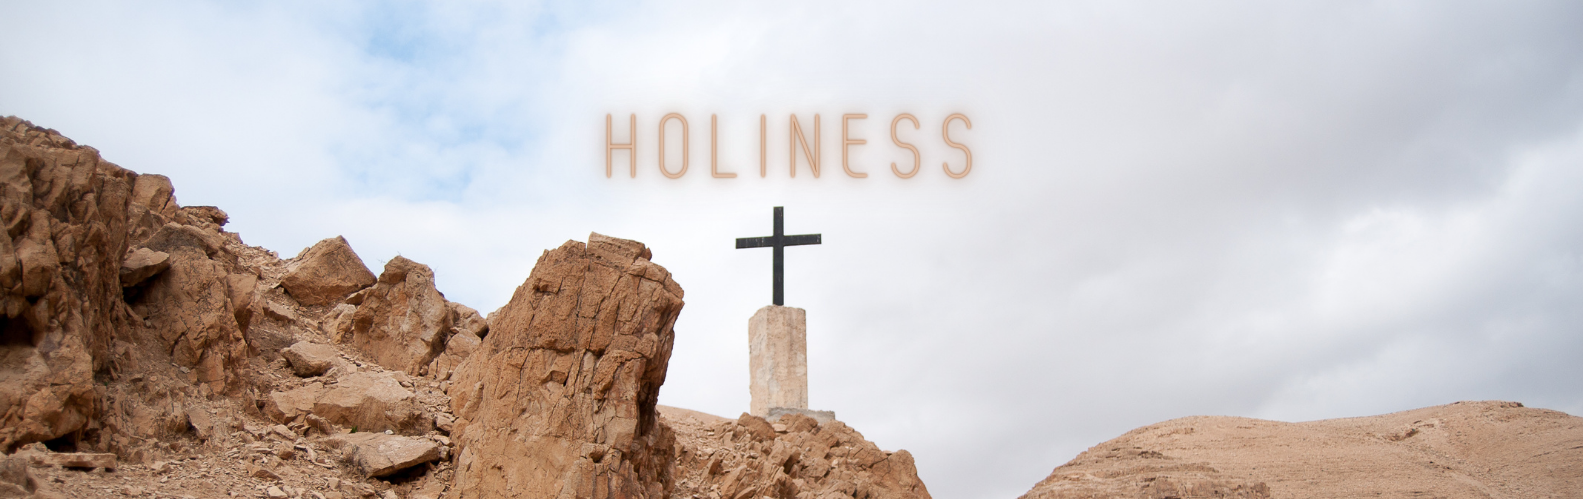 Holiness is a Requisite for Being God’s Anointed